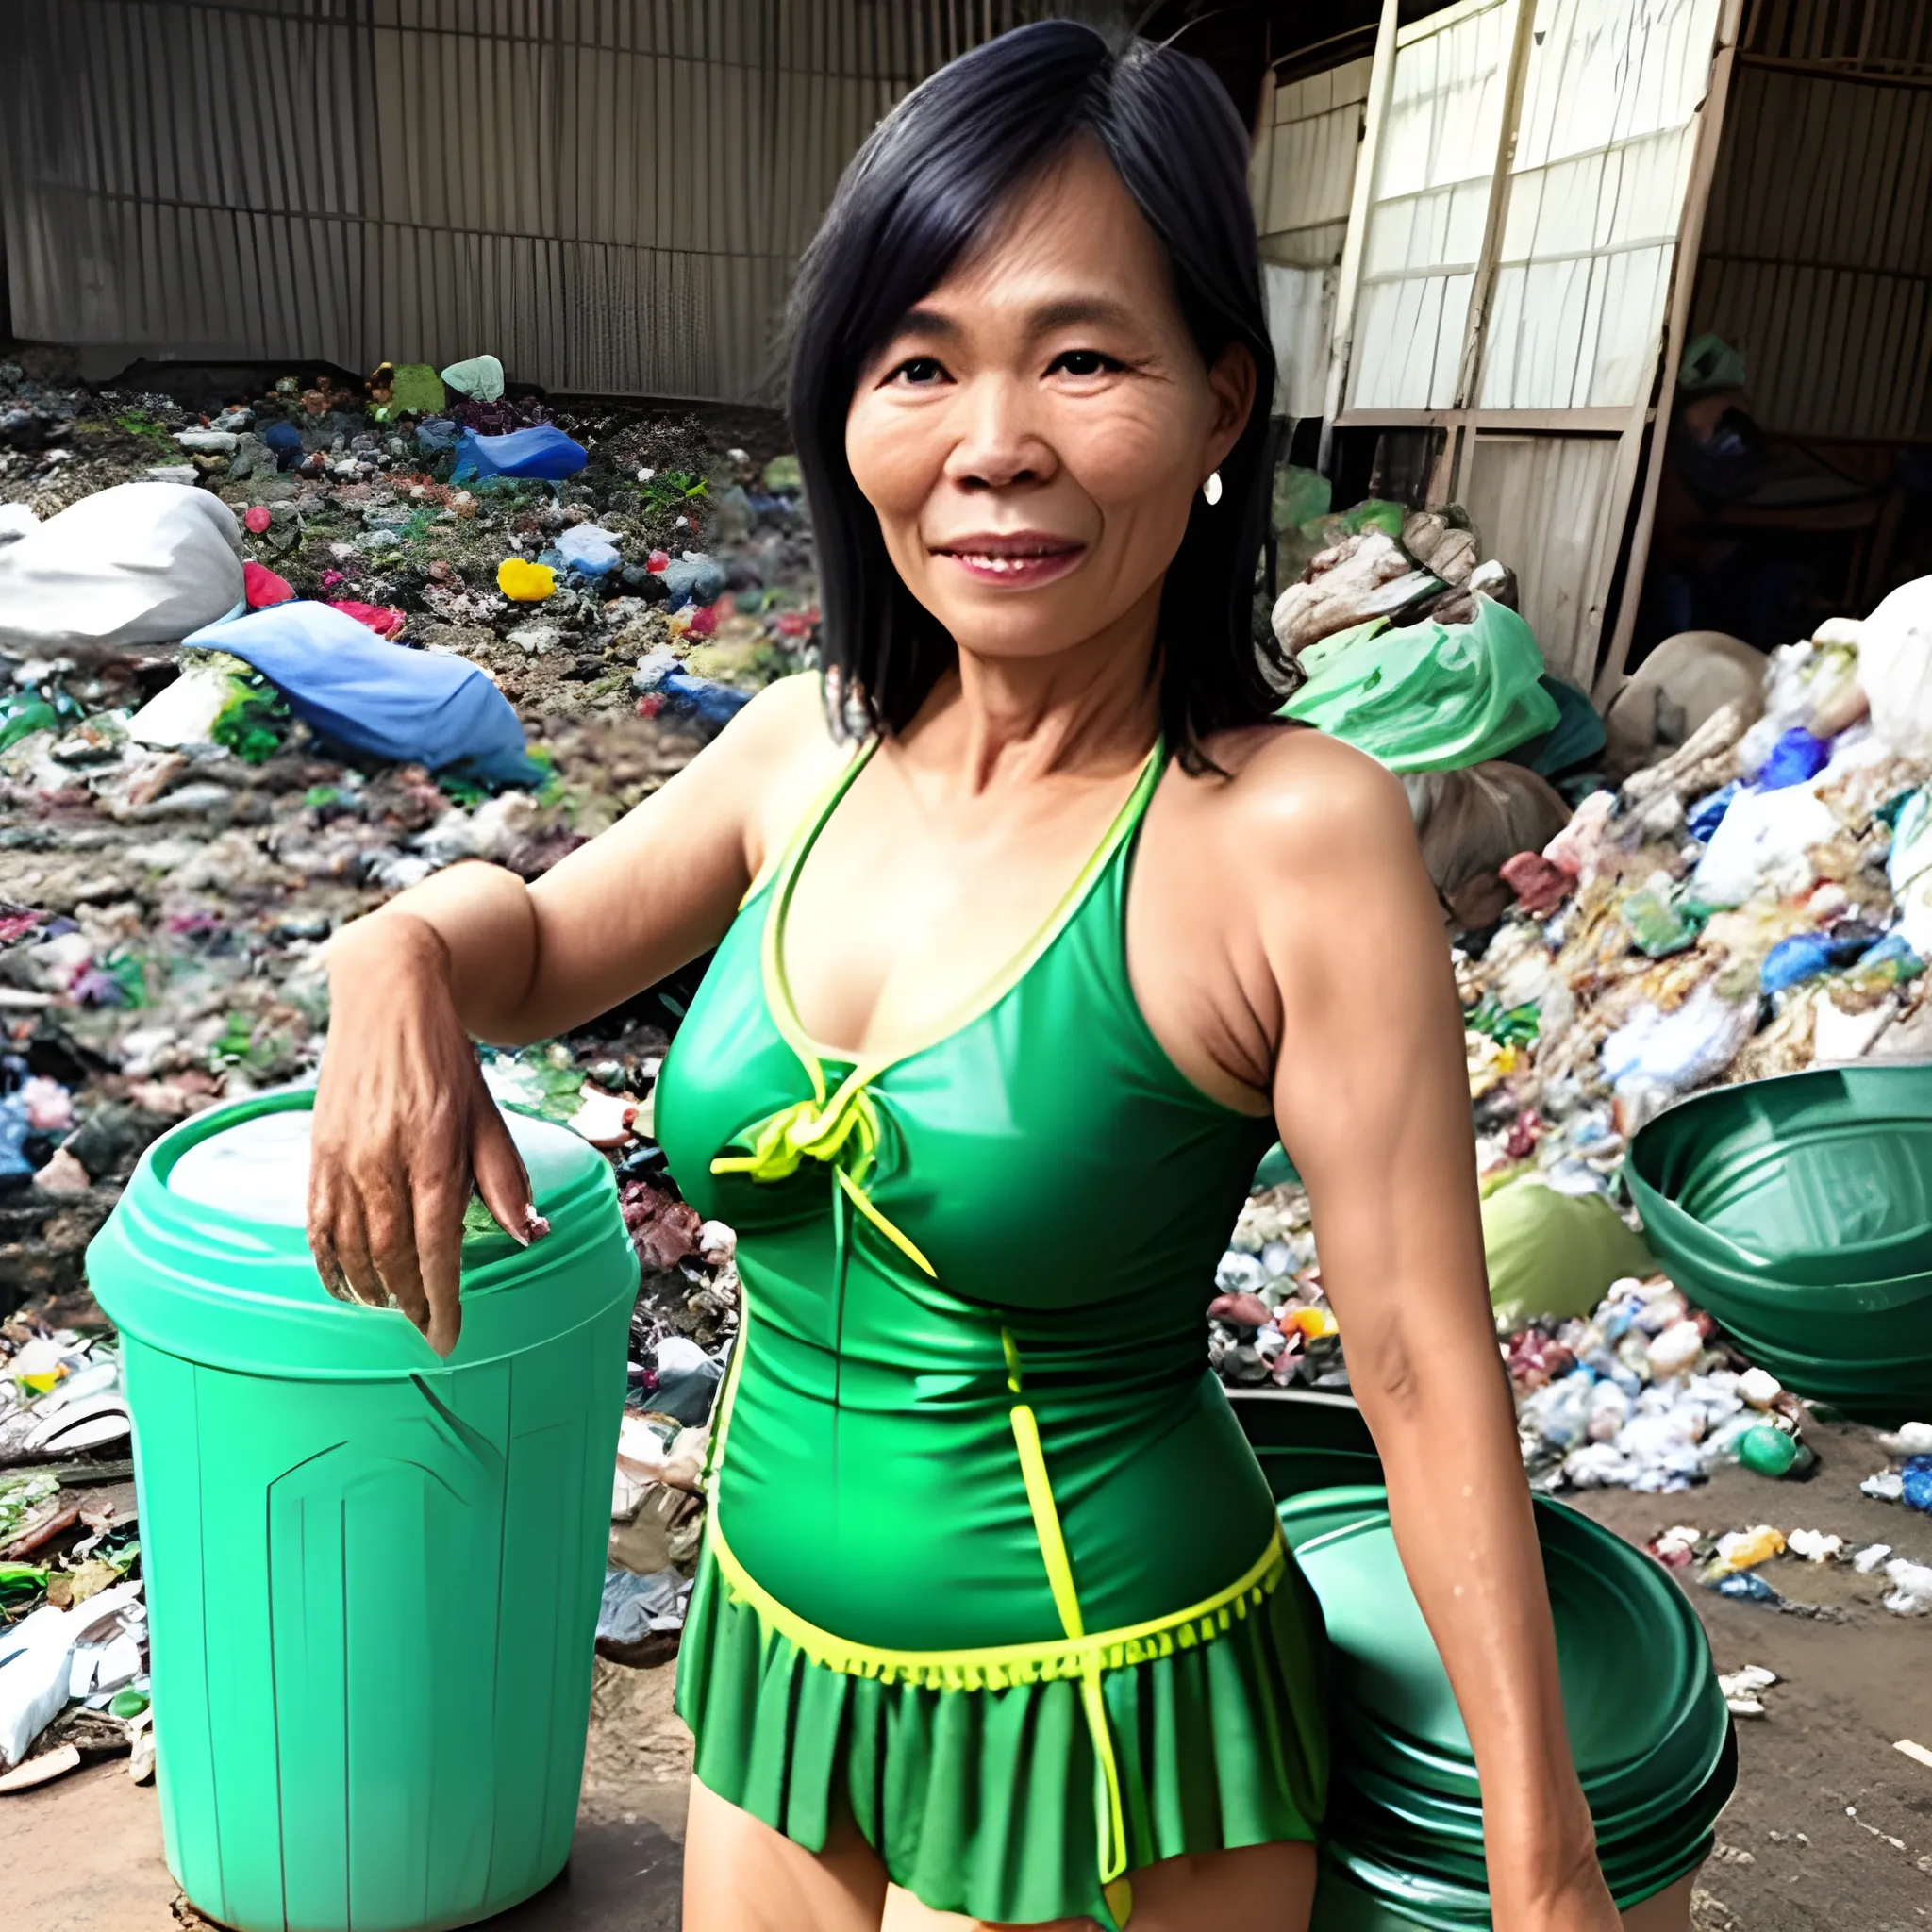 Thai woman 50 years old  beautiful sexy,green swimming costume  in House in the garbage dump